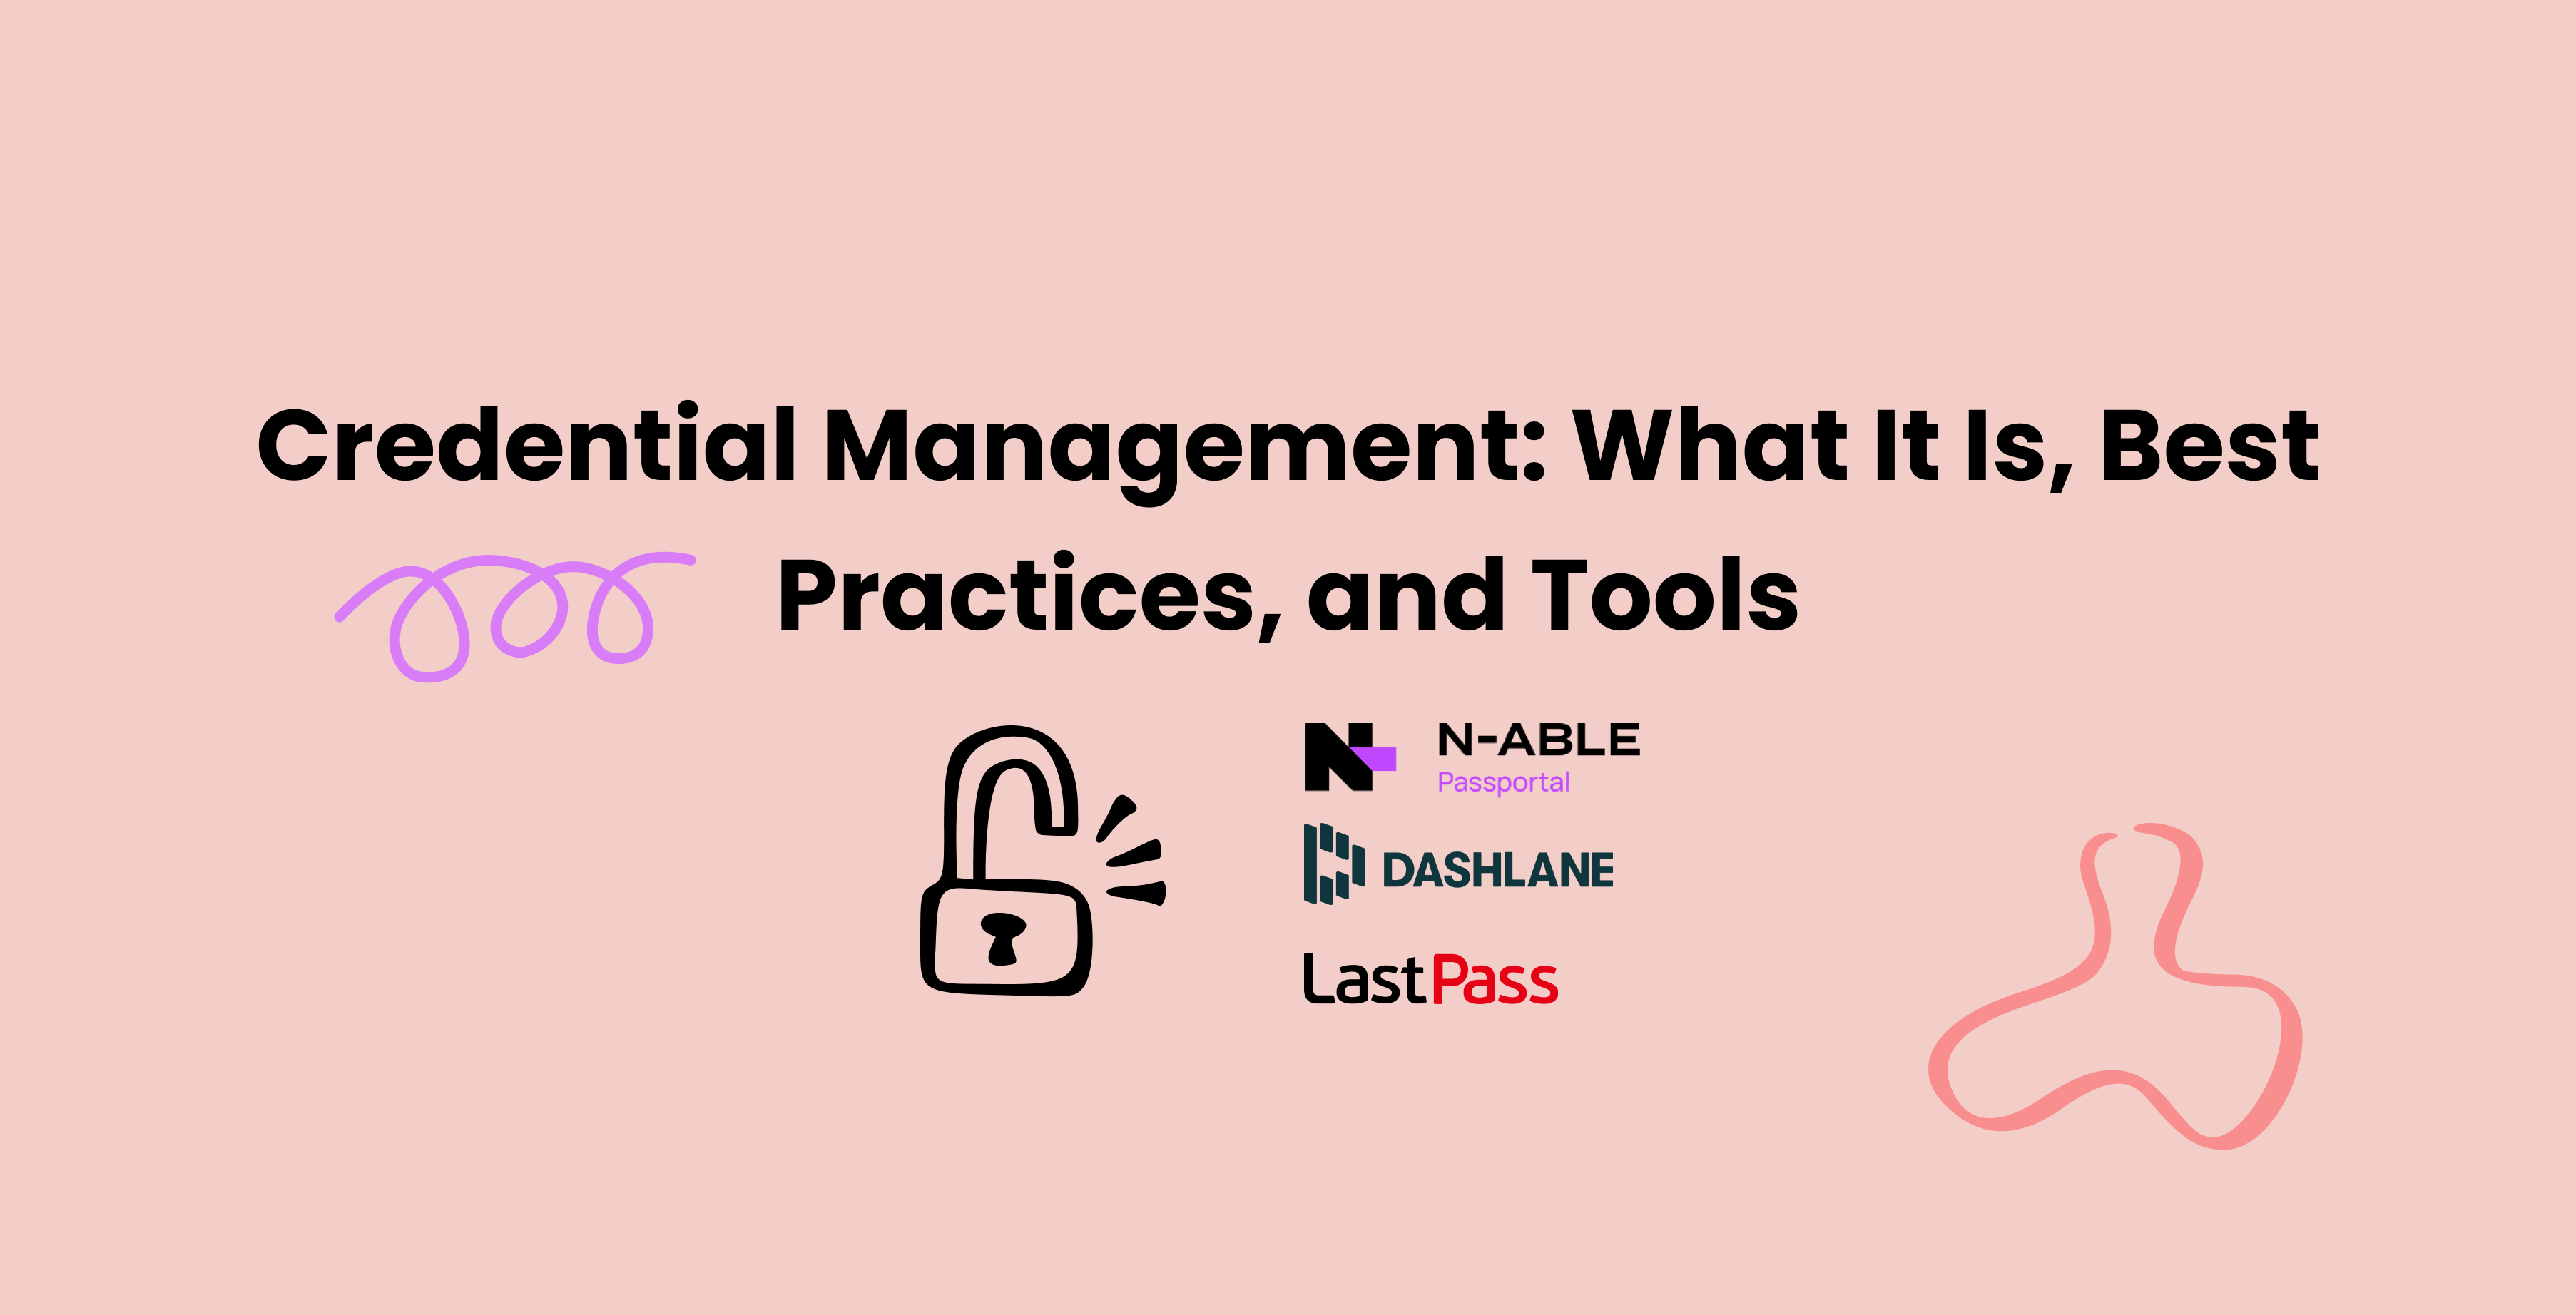 Credential Management: What It Is, Best Practices, and Tools